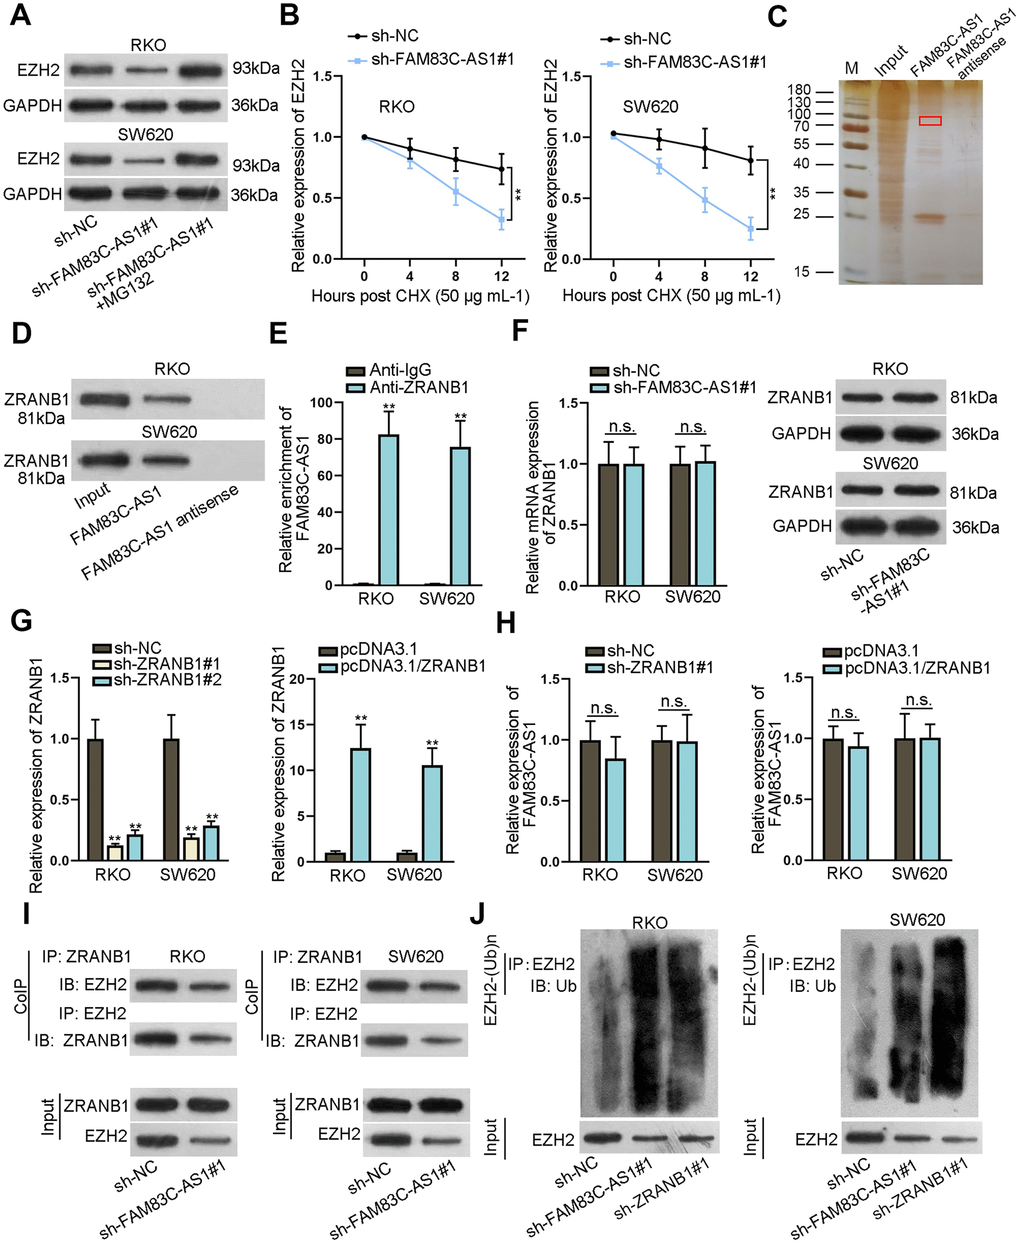 FAM83C-AS1 stabilized EZH2 protein by binding to ZRANB1 in CRC. (A) EZH2 protein expression was analyzed using western blotting analysis in different groups. (B) After treatment with CHX (50 μg mL-1), EZH2 protein stability was evaluated in RKO and SW620 cells transfected with sh-FAM83C-AS1#1 or sh-NC. (C, D) The binding capacity between FAM83C-AS1 and ZRANB1 was measured using RNA pull-down assay. (E) RIP assays further proved that FAM83C-AS1 could bind to ZRANB1 in RKO and SW620 cells. (F) mRNA and protein expression of ZRANB1 in RKO and SW620 cells transfected with sh-FAM83C-AS1#1 or sh-NC were examined using RT-qPCR and western blotting analysis. (G) The efficiency of ZRANB1 knockdown or overexpression was assessed using RT-qPCR analysis. (H) FAM83C-AS1 expression in transfected cells was detected by RT-qPCR. (I) CoIP assay was adopted for analyzing the effect of FAM83C-AS1 depletion on the binding of ZRANB1 to EZH2. (J) The relationship between EZH2 ubiquitination and FAM83C-AS1 or ZRANB1 was analyzed in different groups. **P 